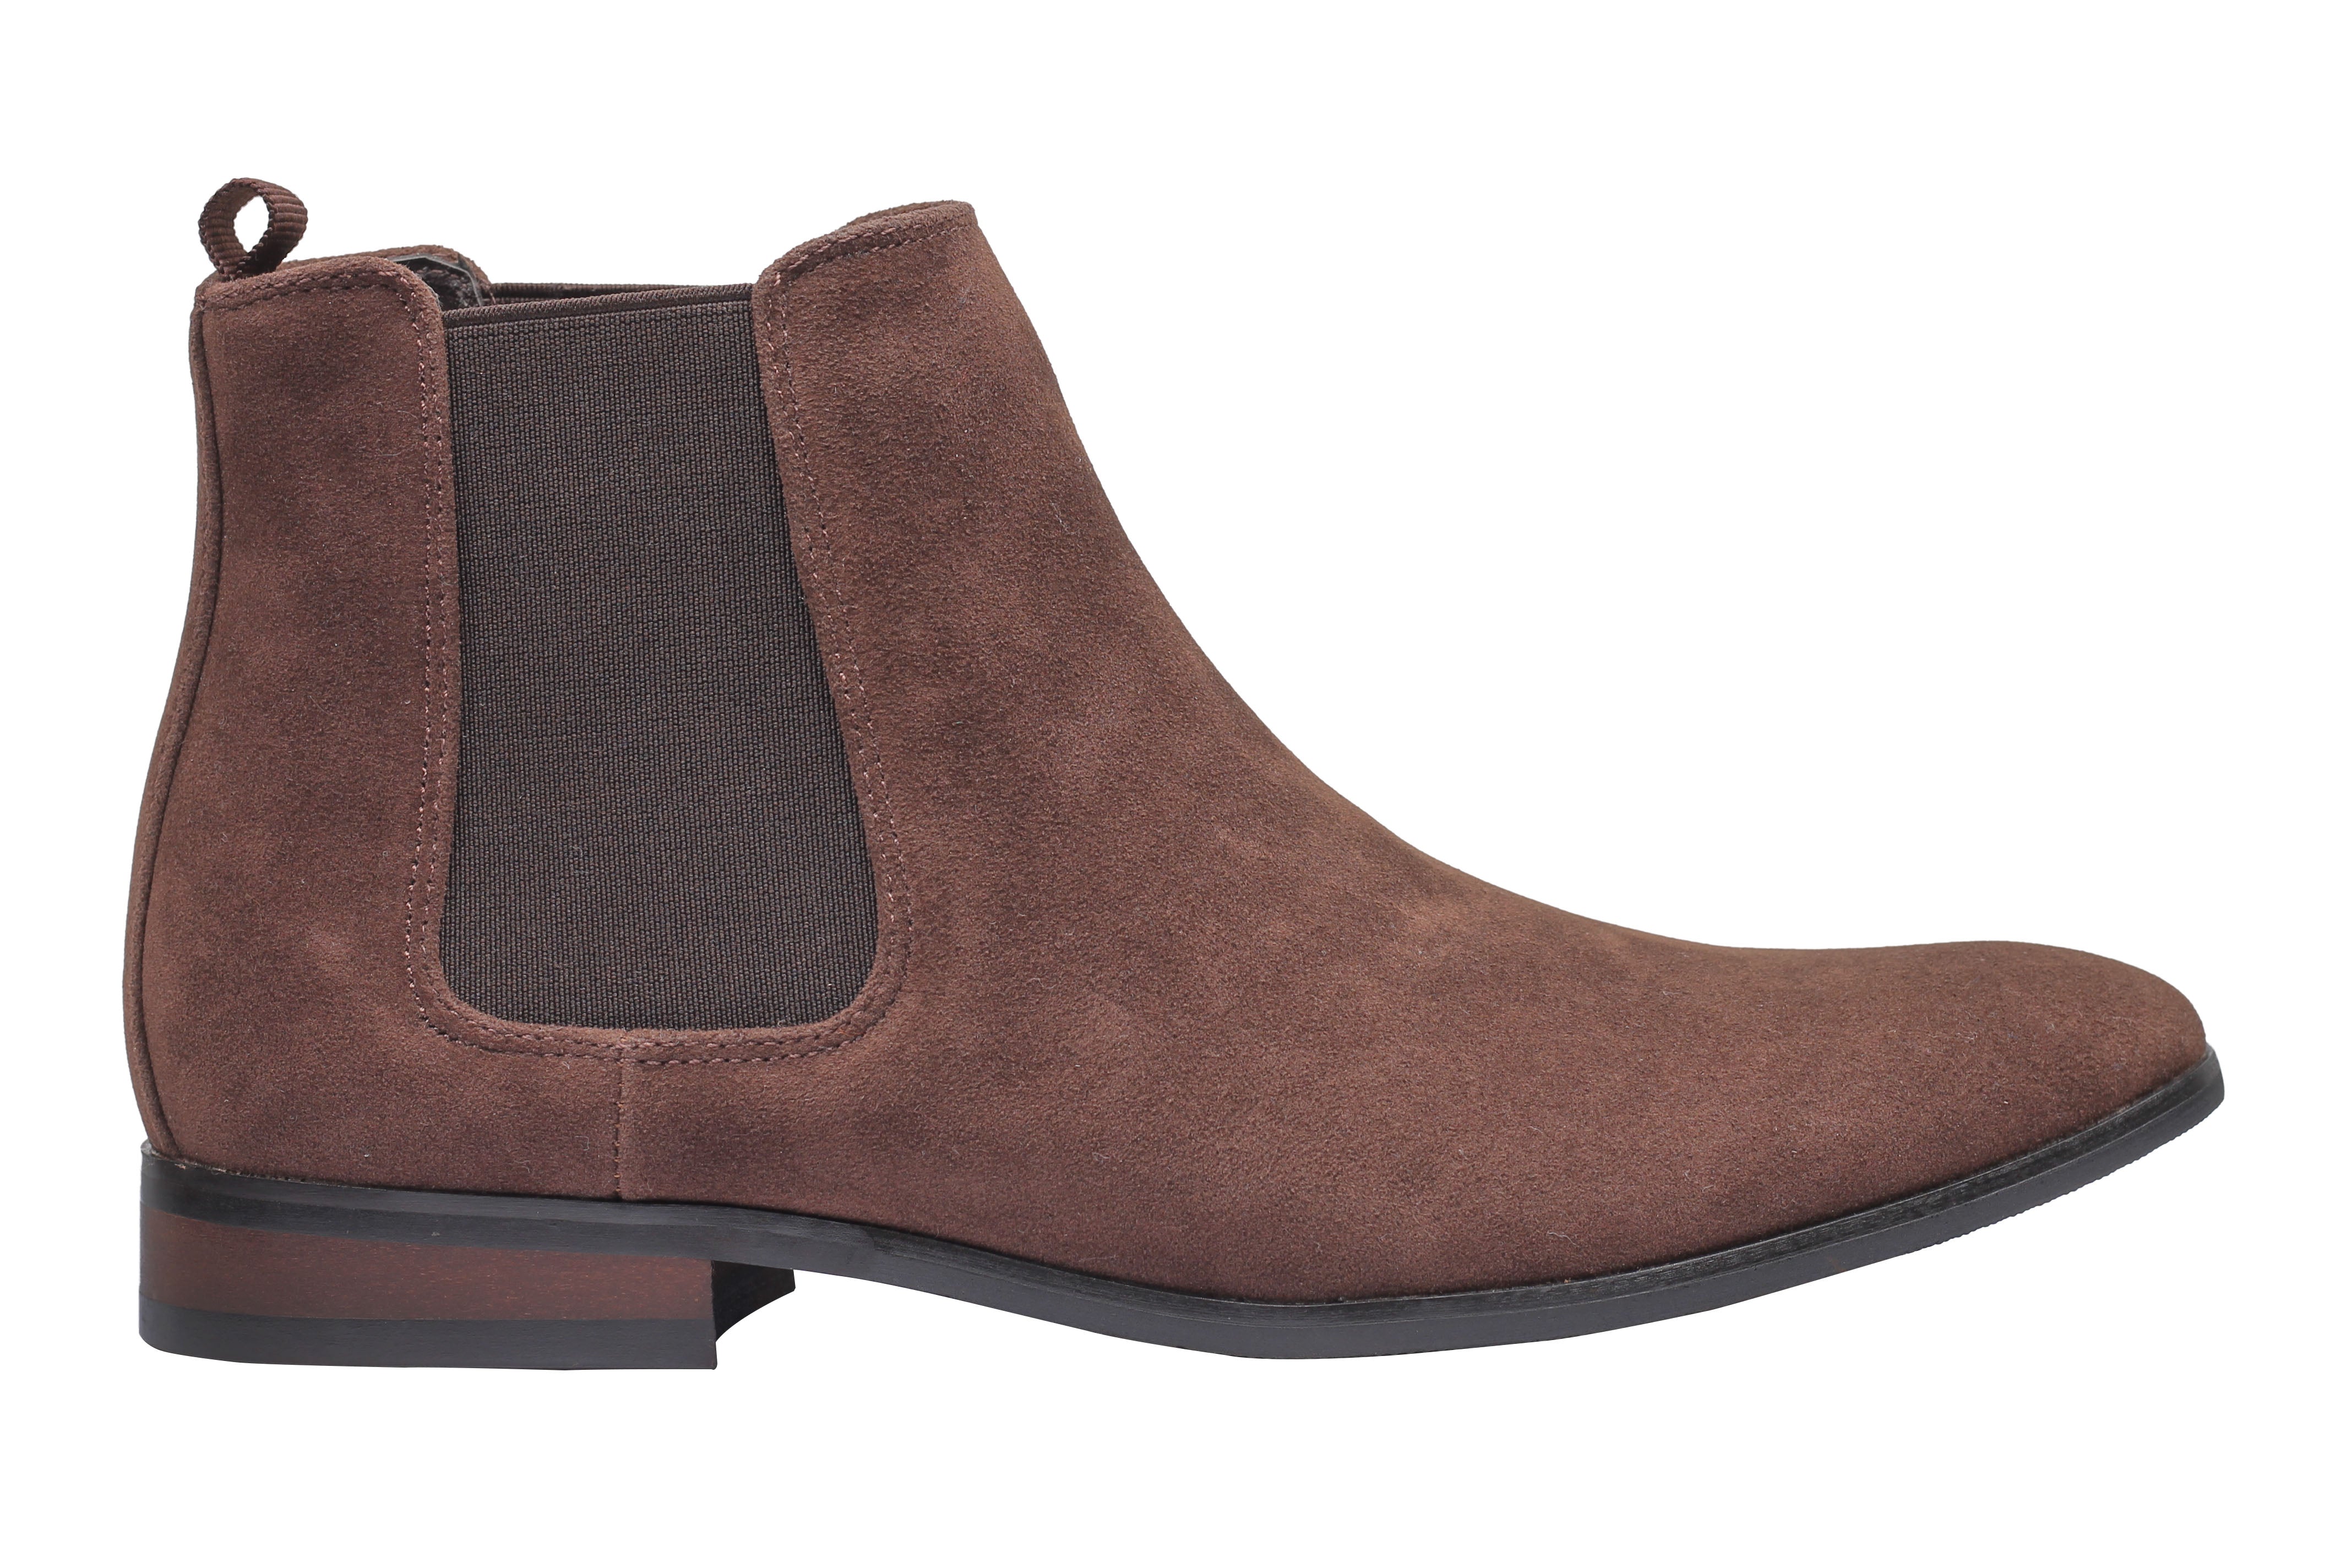 CHELSEA BOOTS IN SUEDE